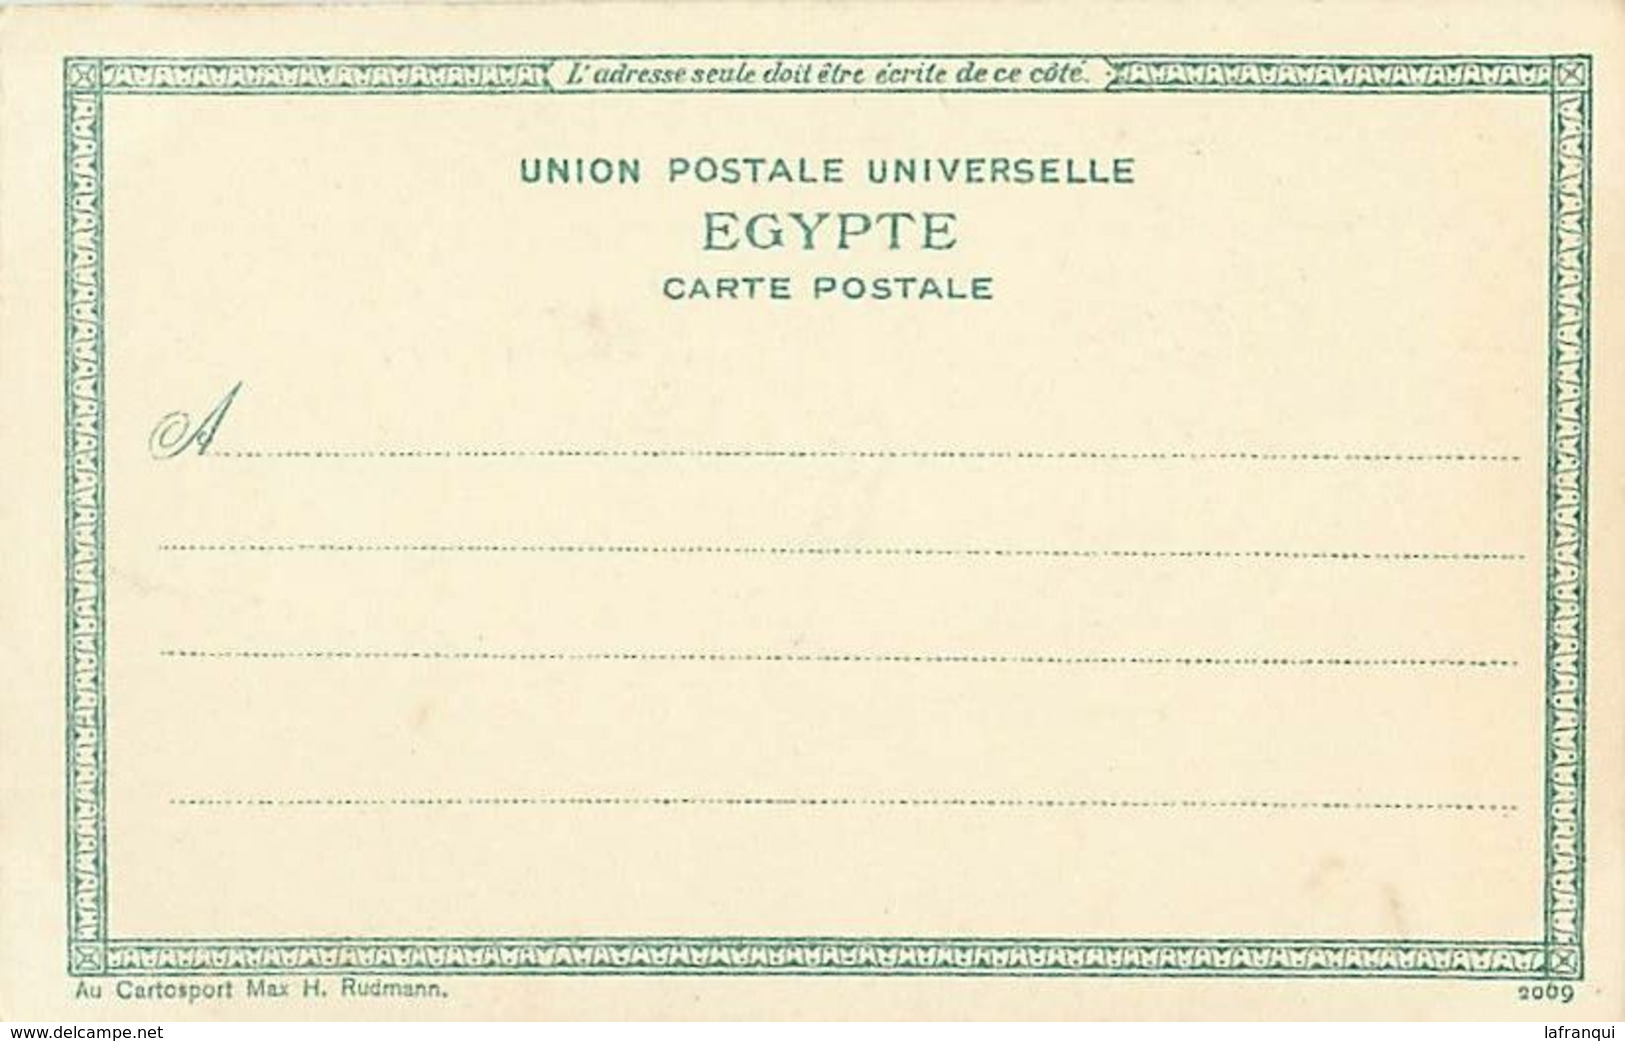 Pays Div- Ref X785- Egypte - Egypt - Pyramides - Ascension Of The Pyramide  - Cairo - Le Caire - - Pyramiden